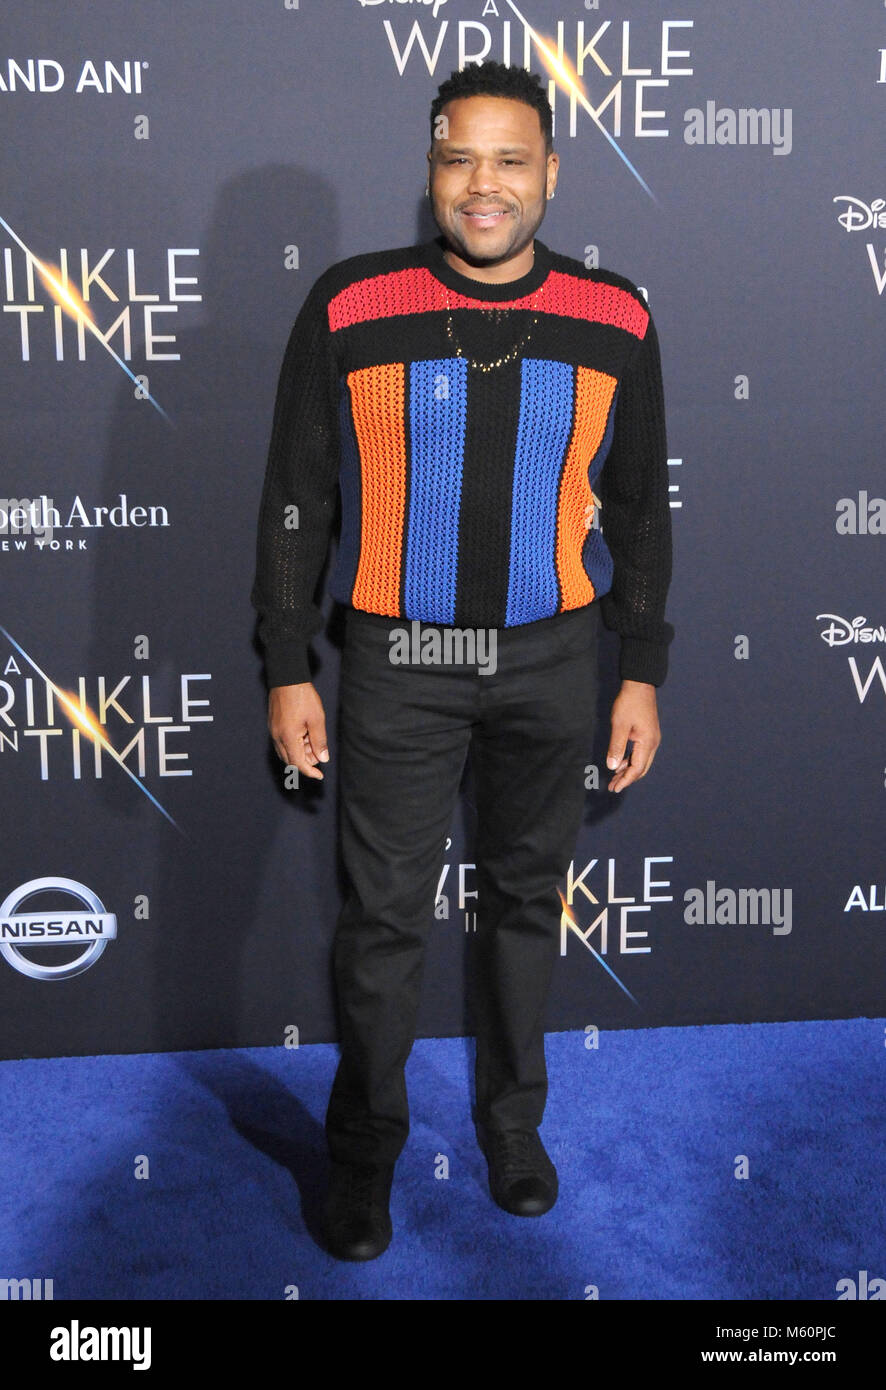 Los Angeles, USA. 26th Feb, 2018. Actor Anthony Anderson attends the World Premiere of Disney's' 'A Wrinkle In Time' at the El Capitan Theatre on February 26, 2018 in Los Angeles, California. Photo by Barry King/Alamy Live News Stock Photo